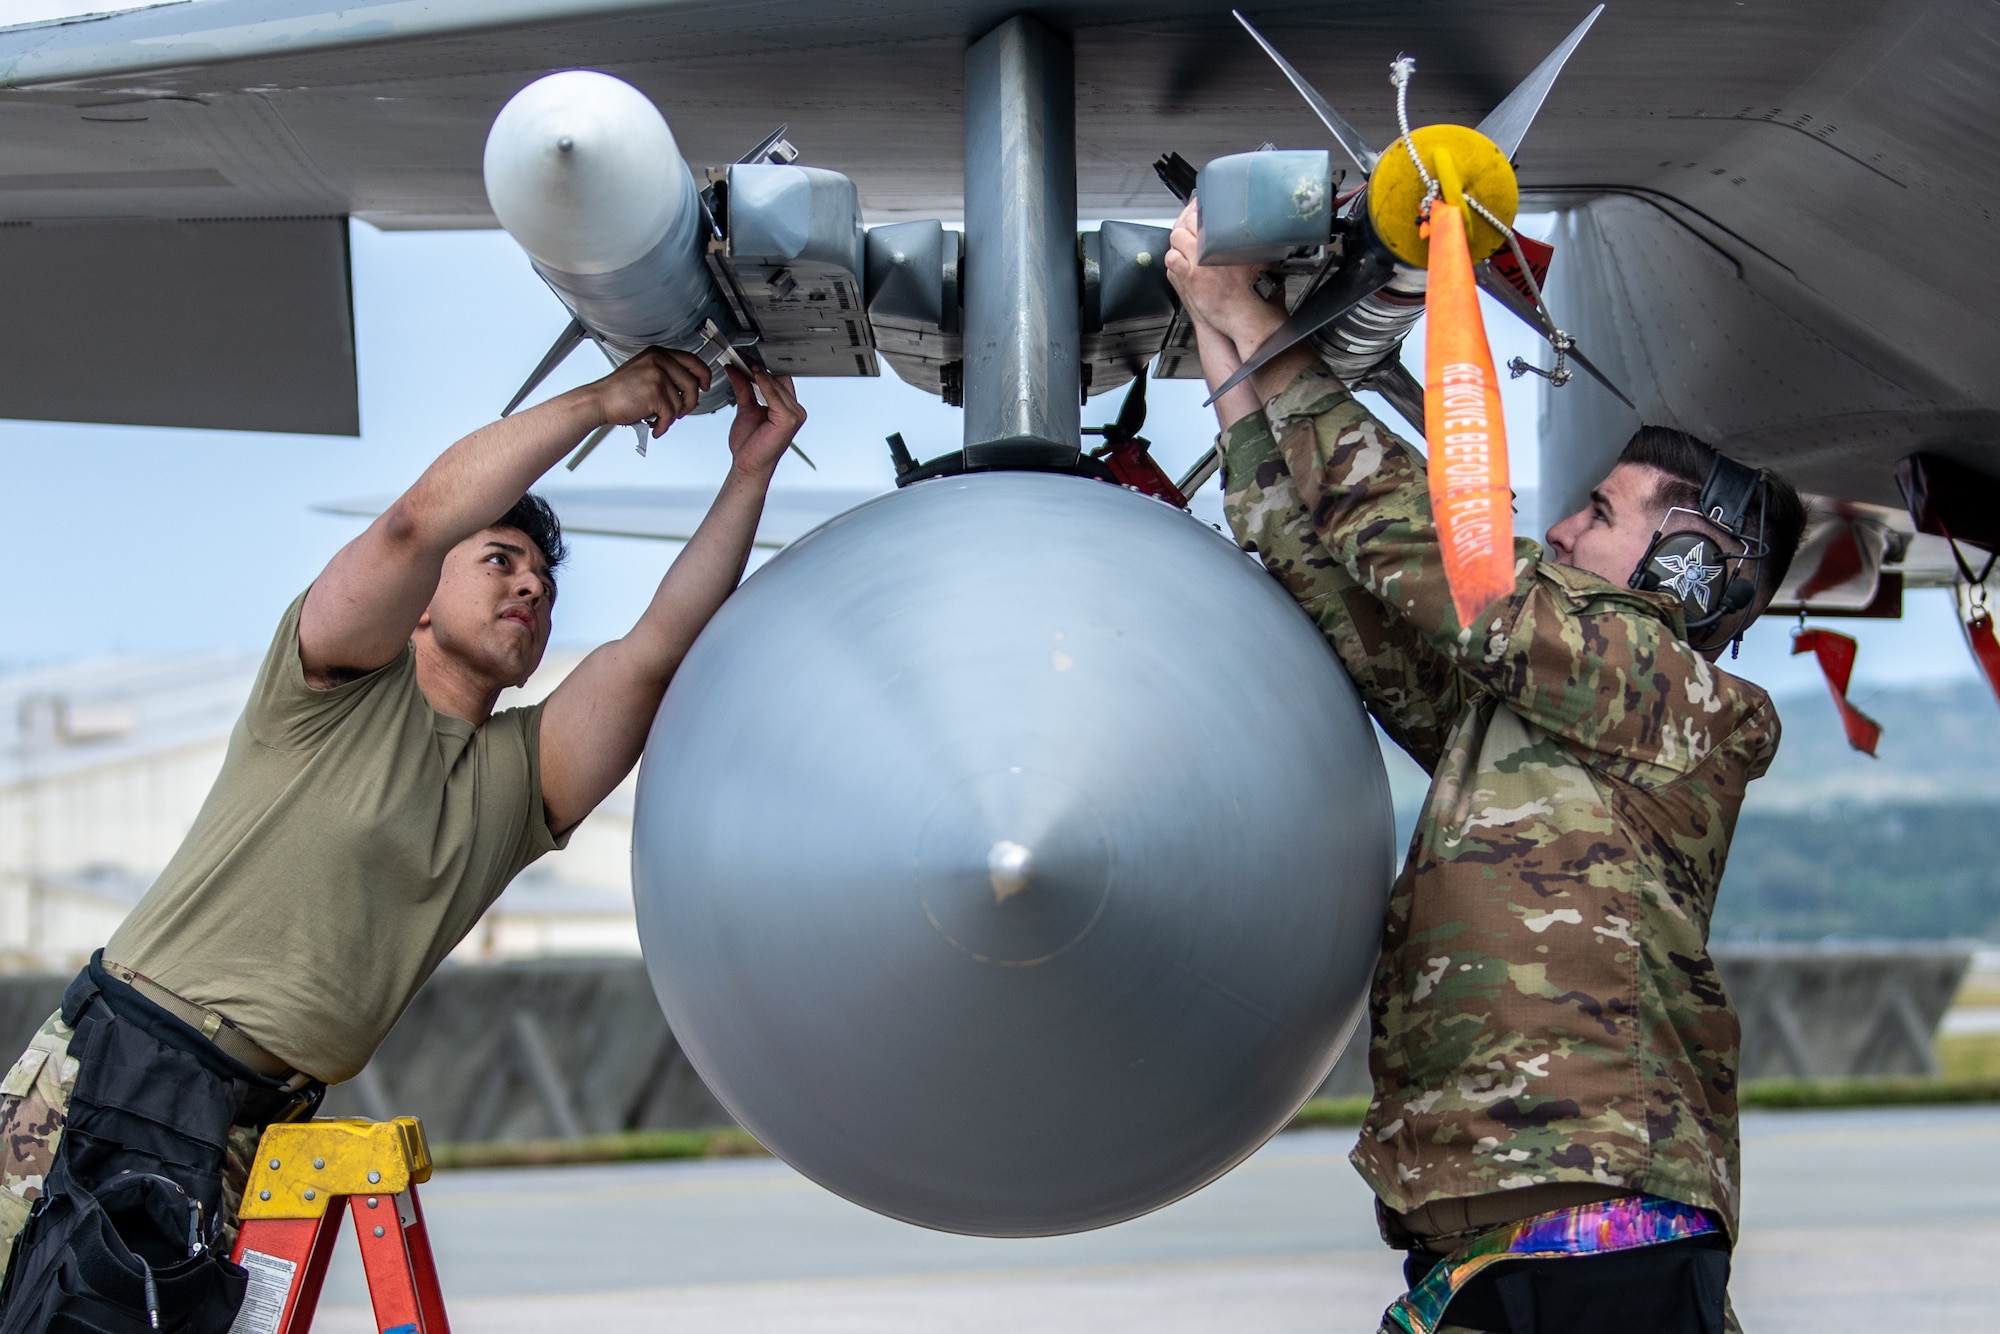 Senior Airman Kevin Arredondo, left, 44th Aircraft Maintenance Unit weapons load crew member, and Staff Sgt. Bryor Mortiz, right, 44th AMU weapons crew chief, load ordnance onto an F-15C Eagle assigned to the 44th Fighter Squadron during Shogun Showdown, a weapons load competition at Kadena Air Base, Japan, Feb. 3, 2023. The purpose of the event was to hold friendly competition amongst weapons load crews for several different airframes, showcase multi-capable Airmen in action and demonstrate the work that goes into generating a combat-ready aircraft. (U.S. Air Force photo by Airman 1st Class Sebastian Romawac)